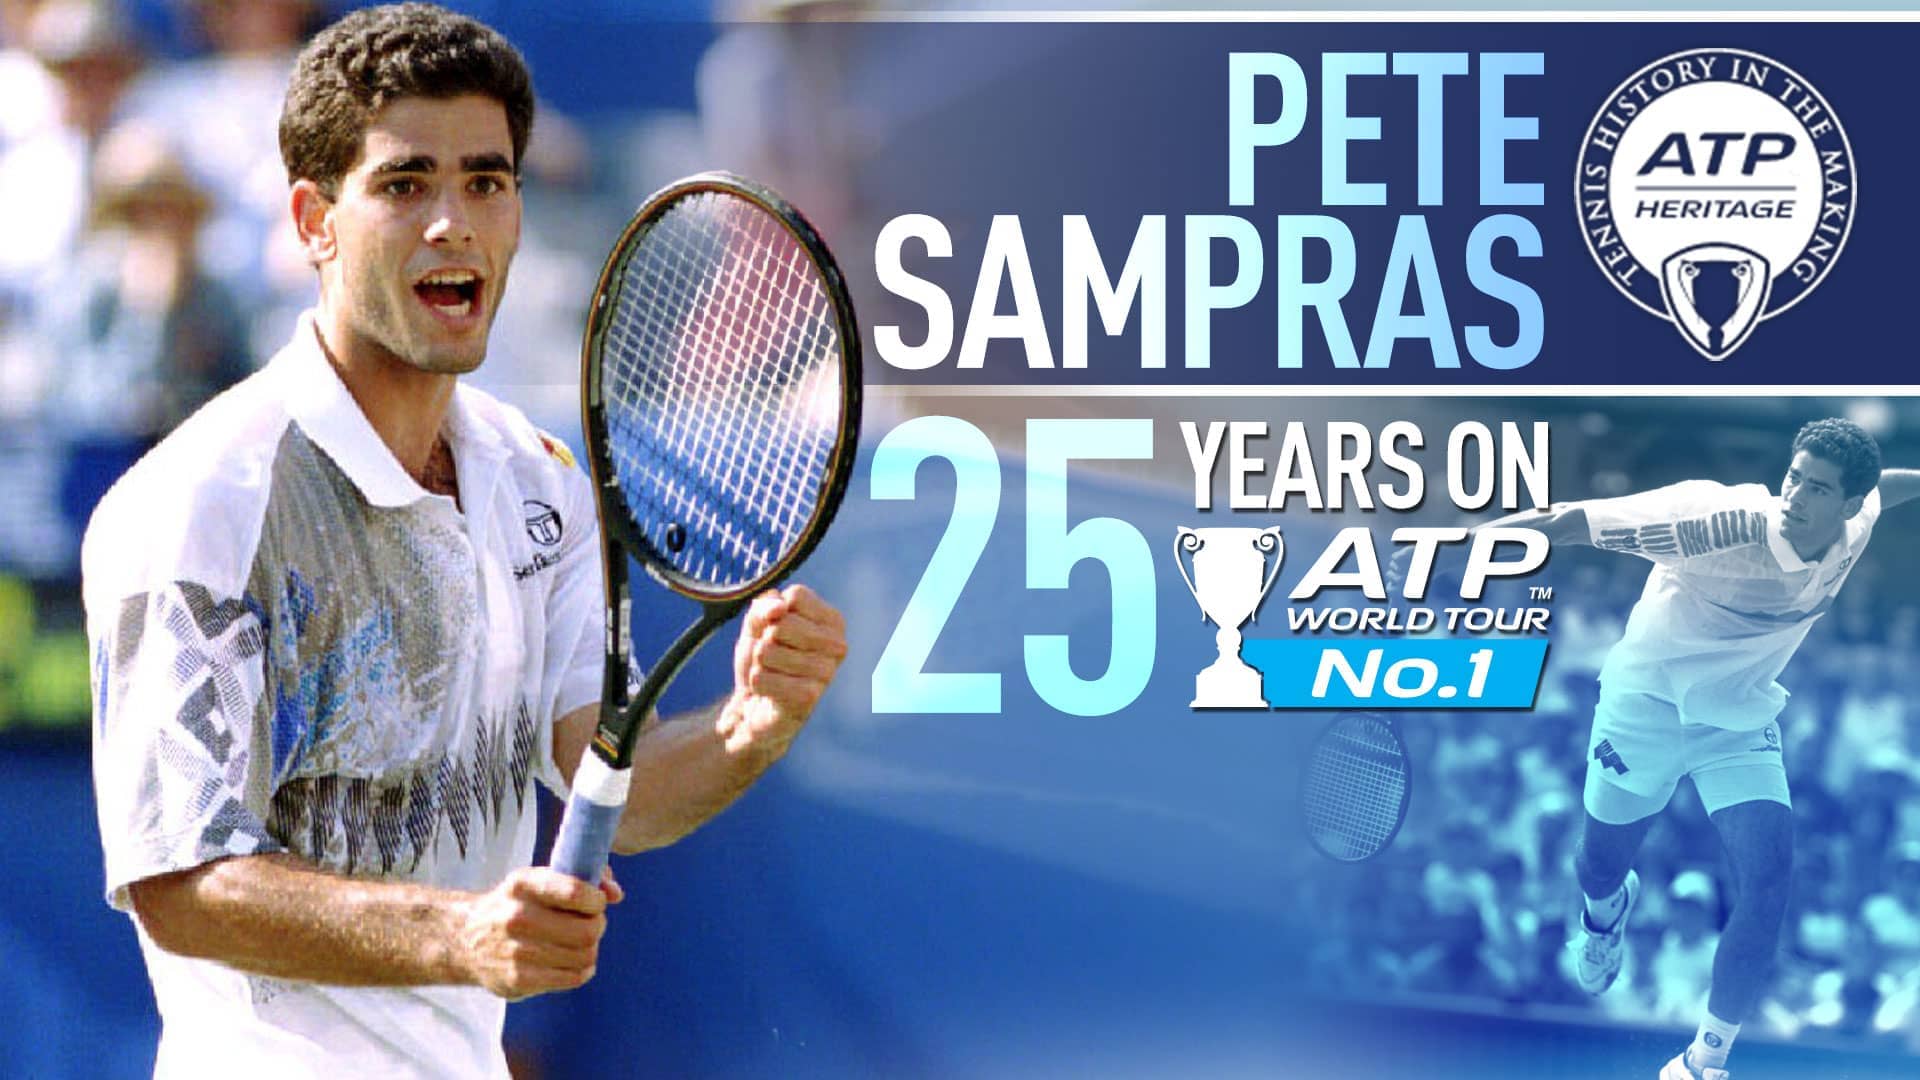 Pete Sampras first rose to No. 1 in the ATP Rankings on 12 April 1993, the first of 286 weeks - in 11 stints - in the top spot.